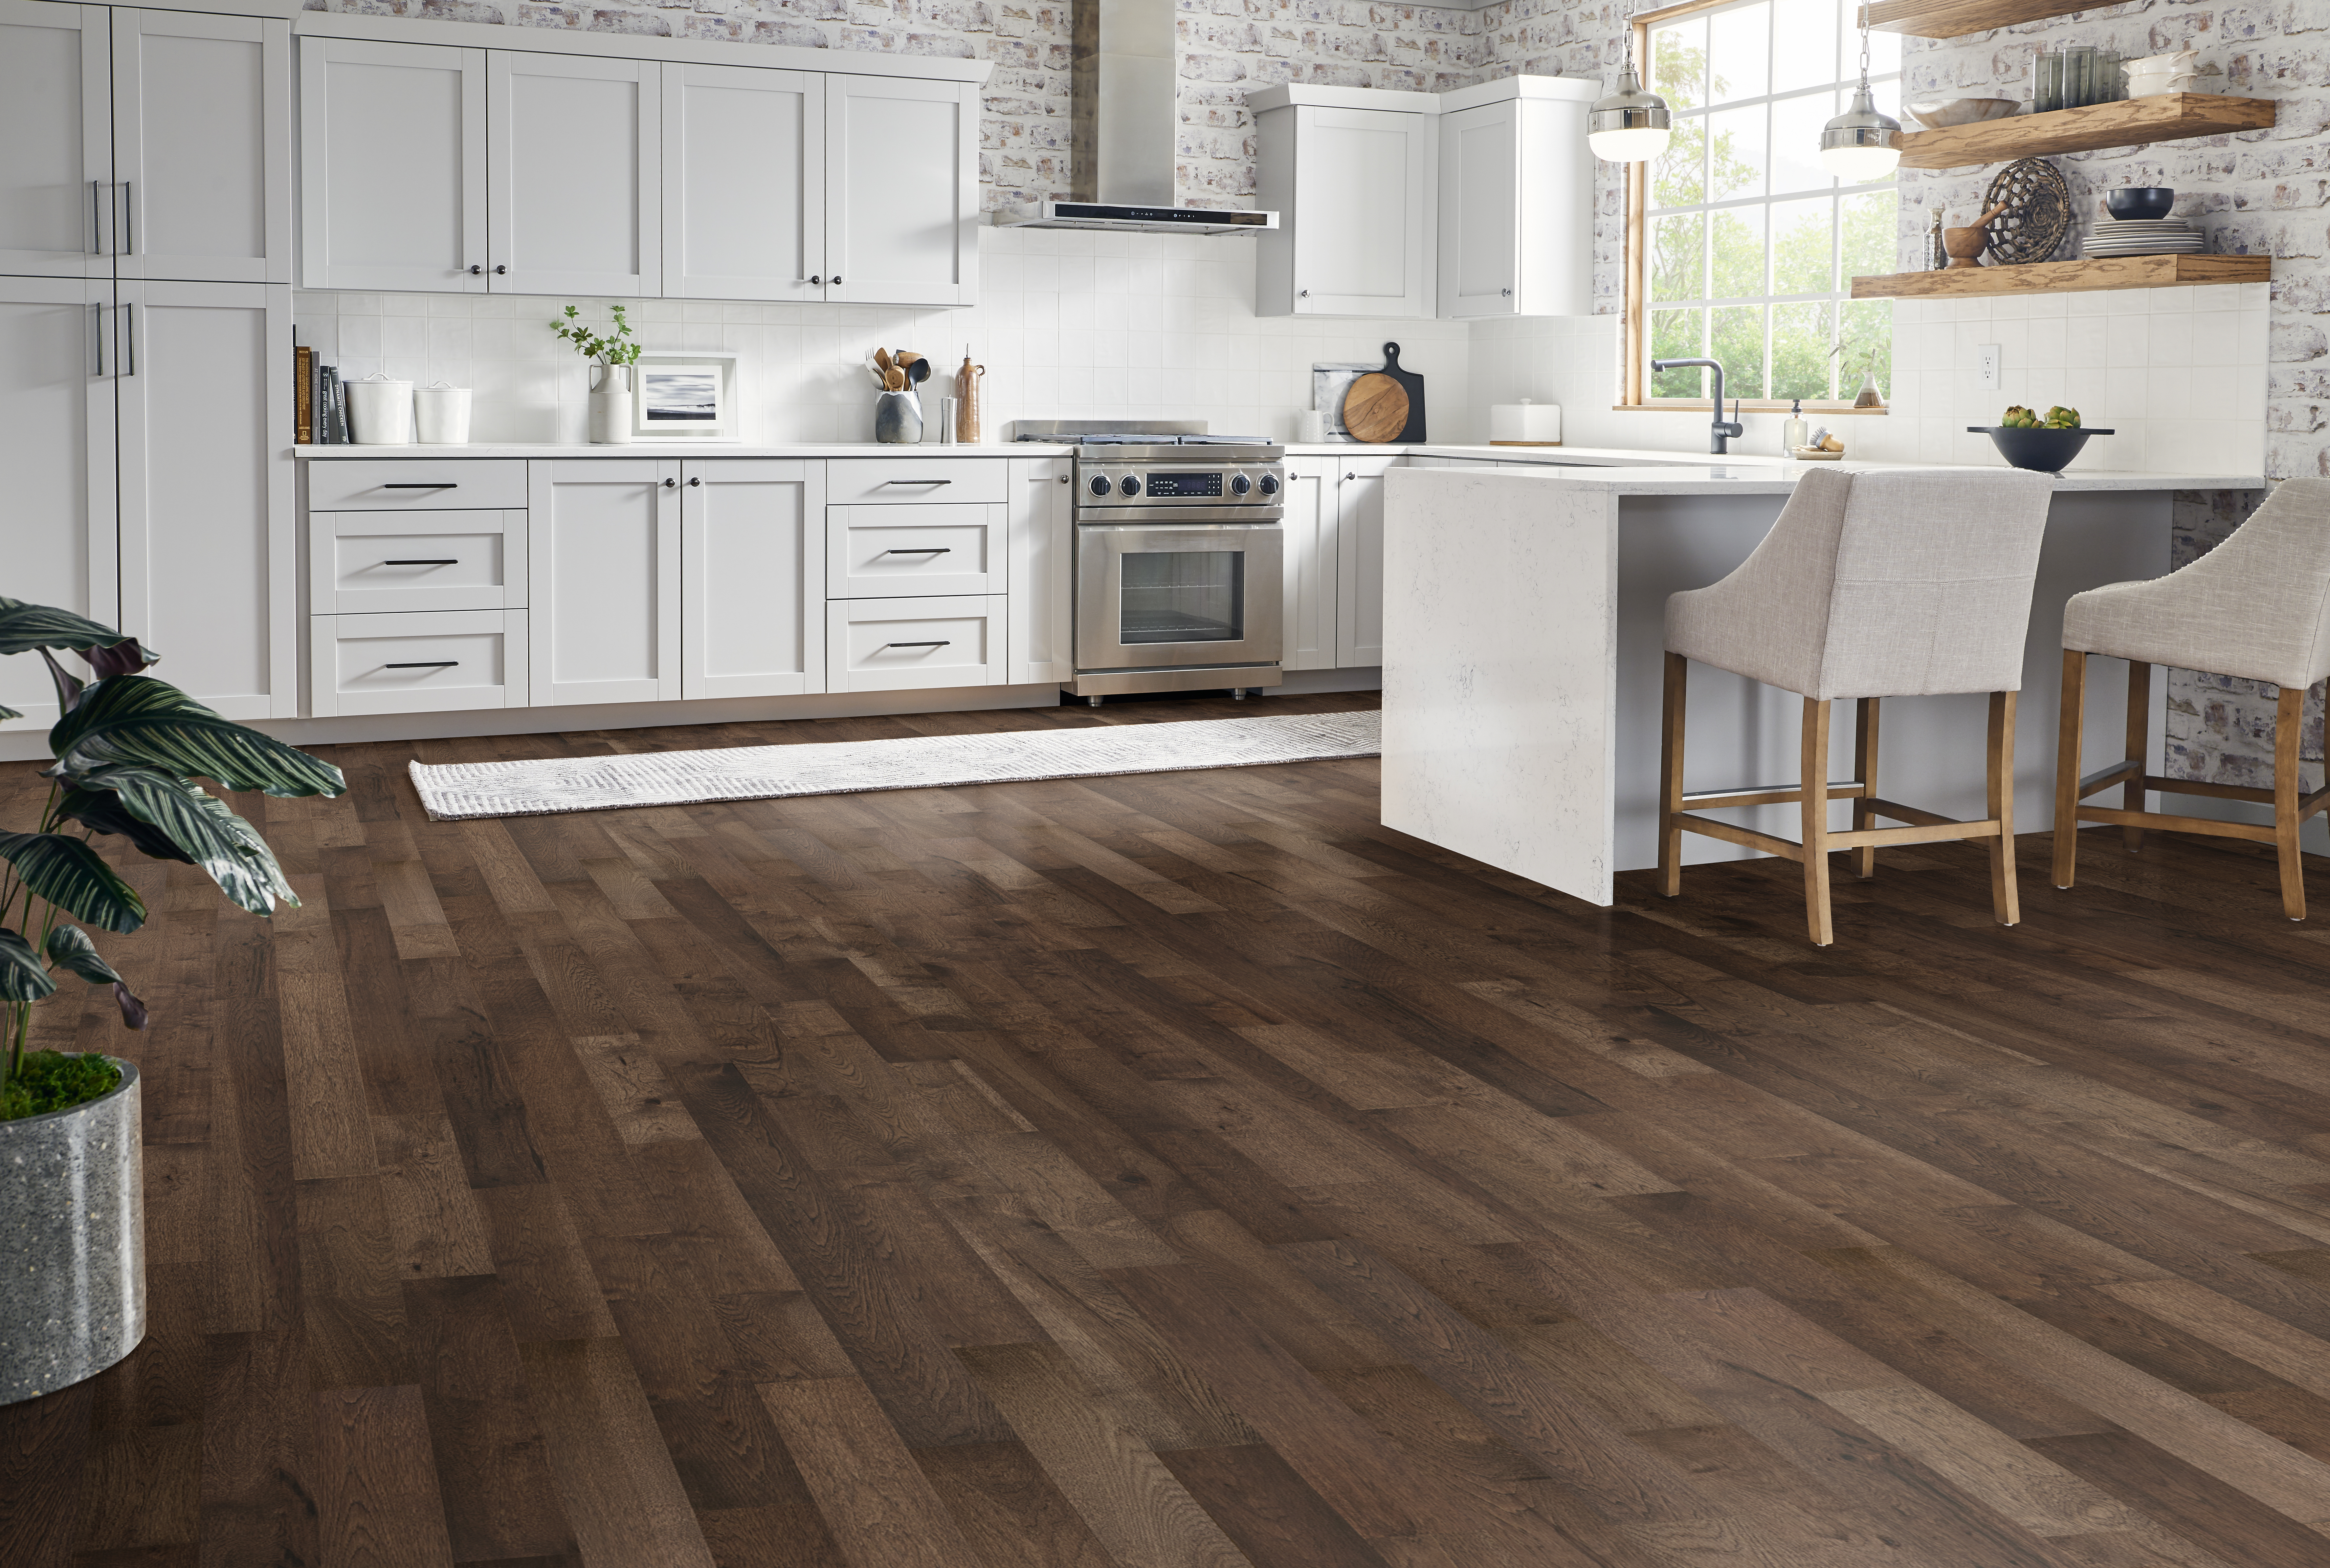 Natural Forest Shaded Brown Solid Hardwood NFSH140S